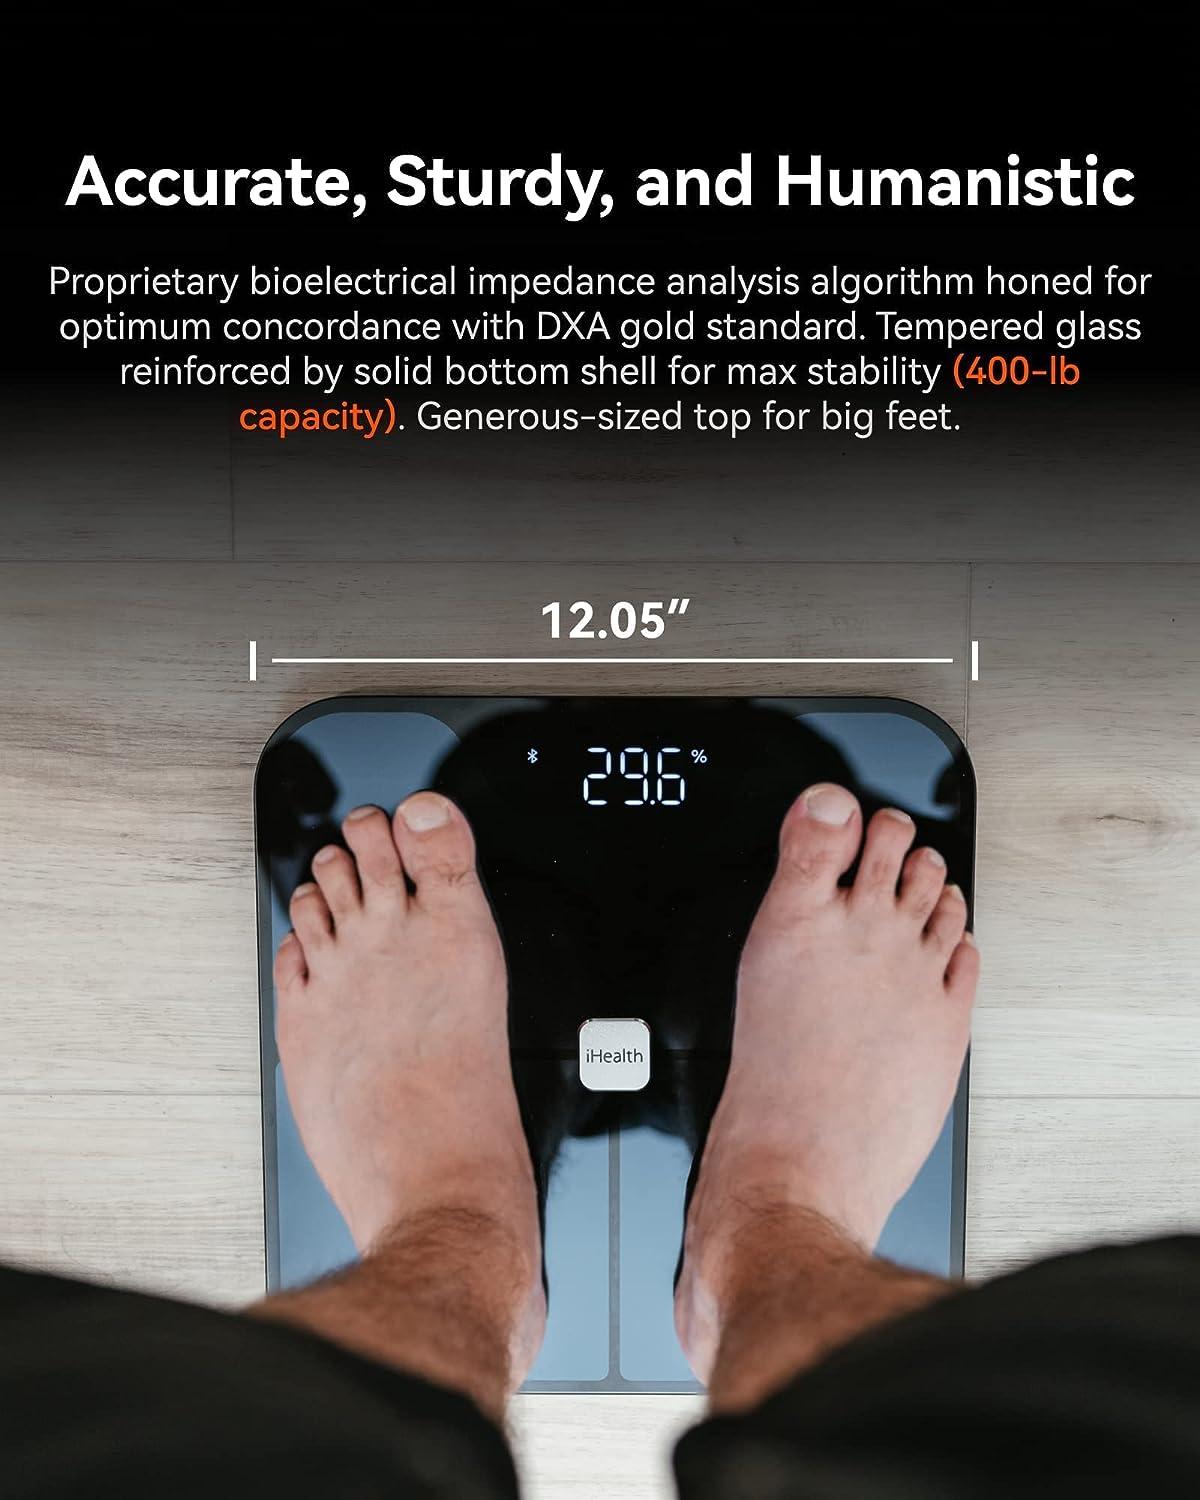 Smart BMI Digital Scale - Measure Weight and Body Fat - Most Accurate  Bluetooth Glass Bathroom Scale,Black 